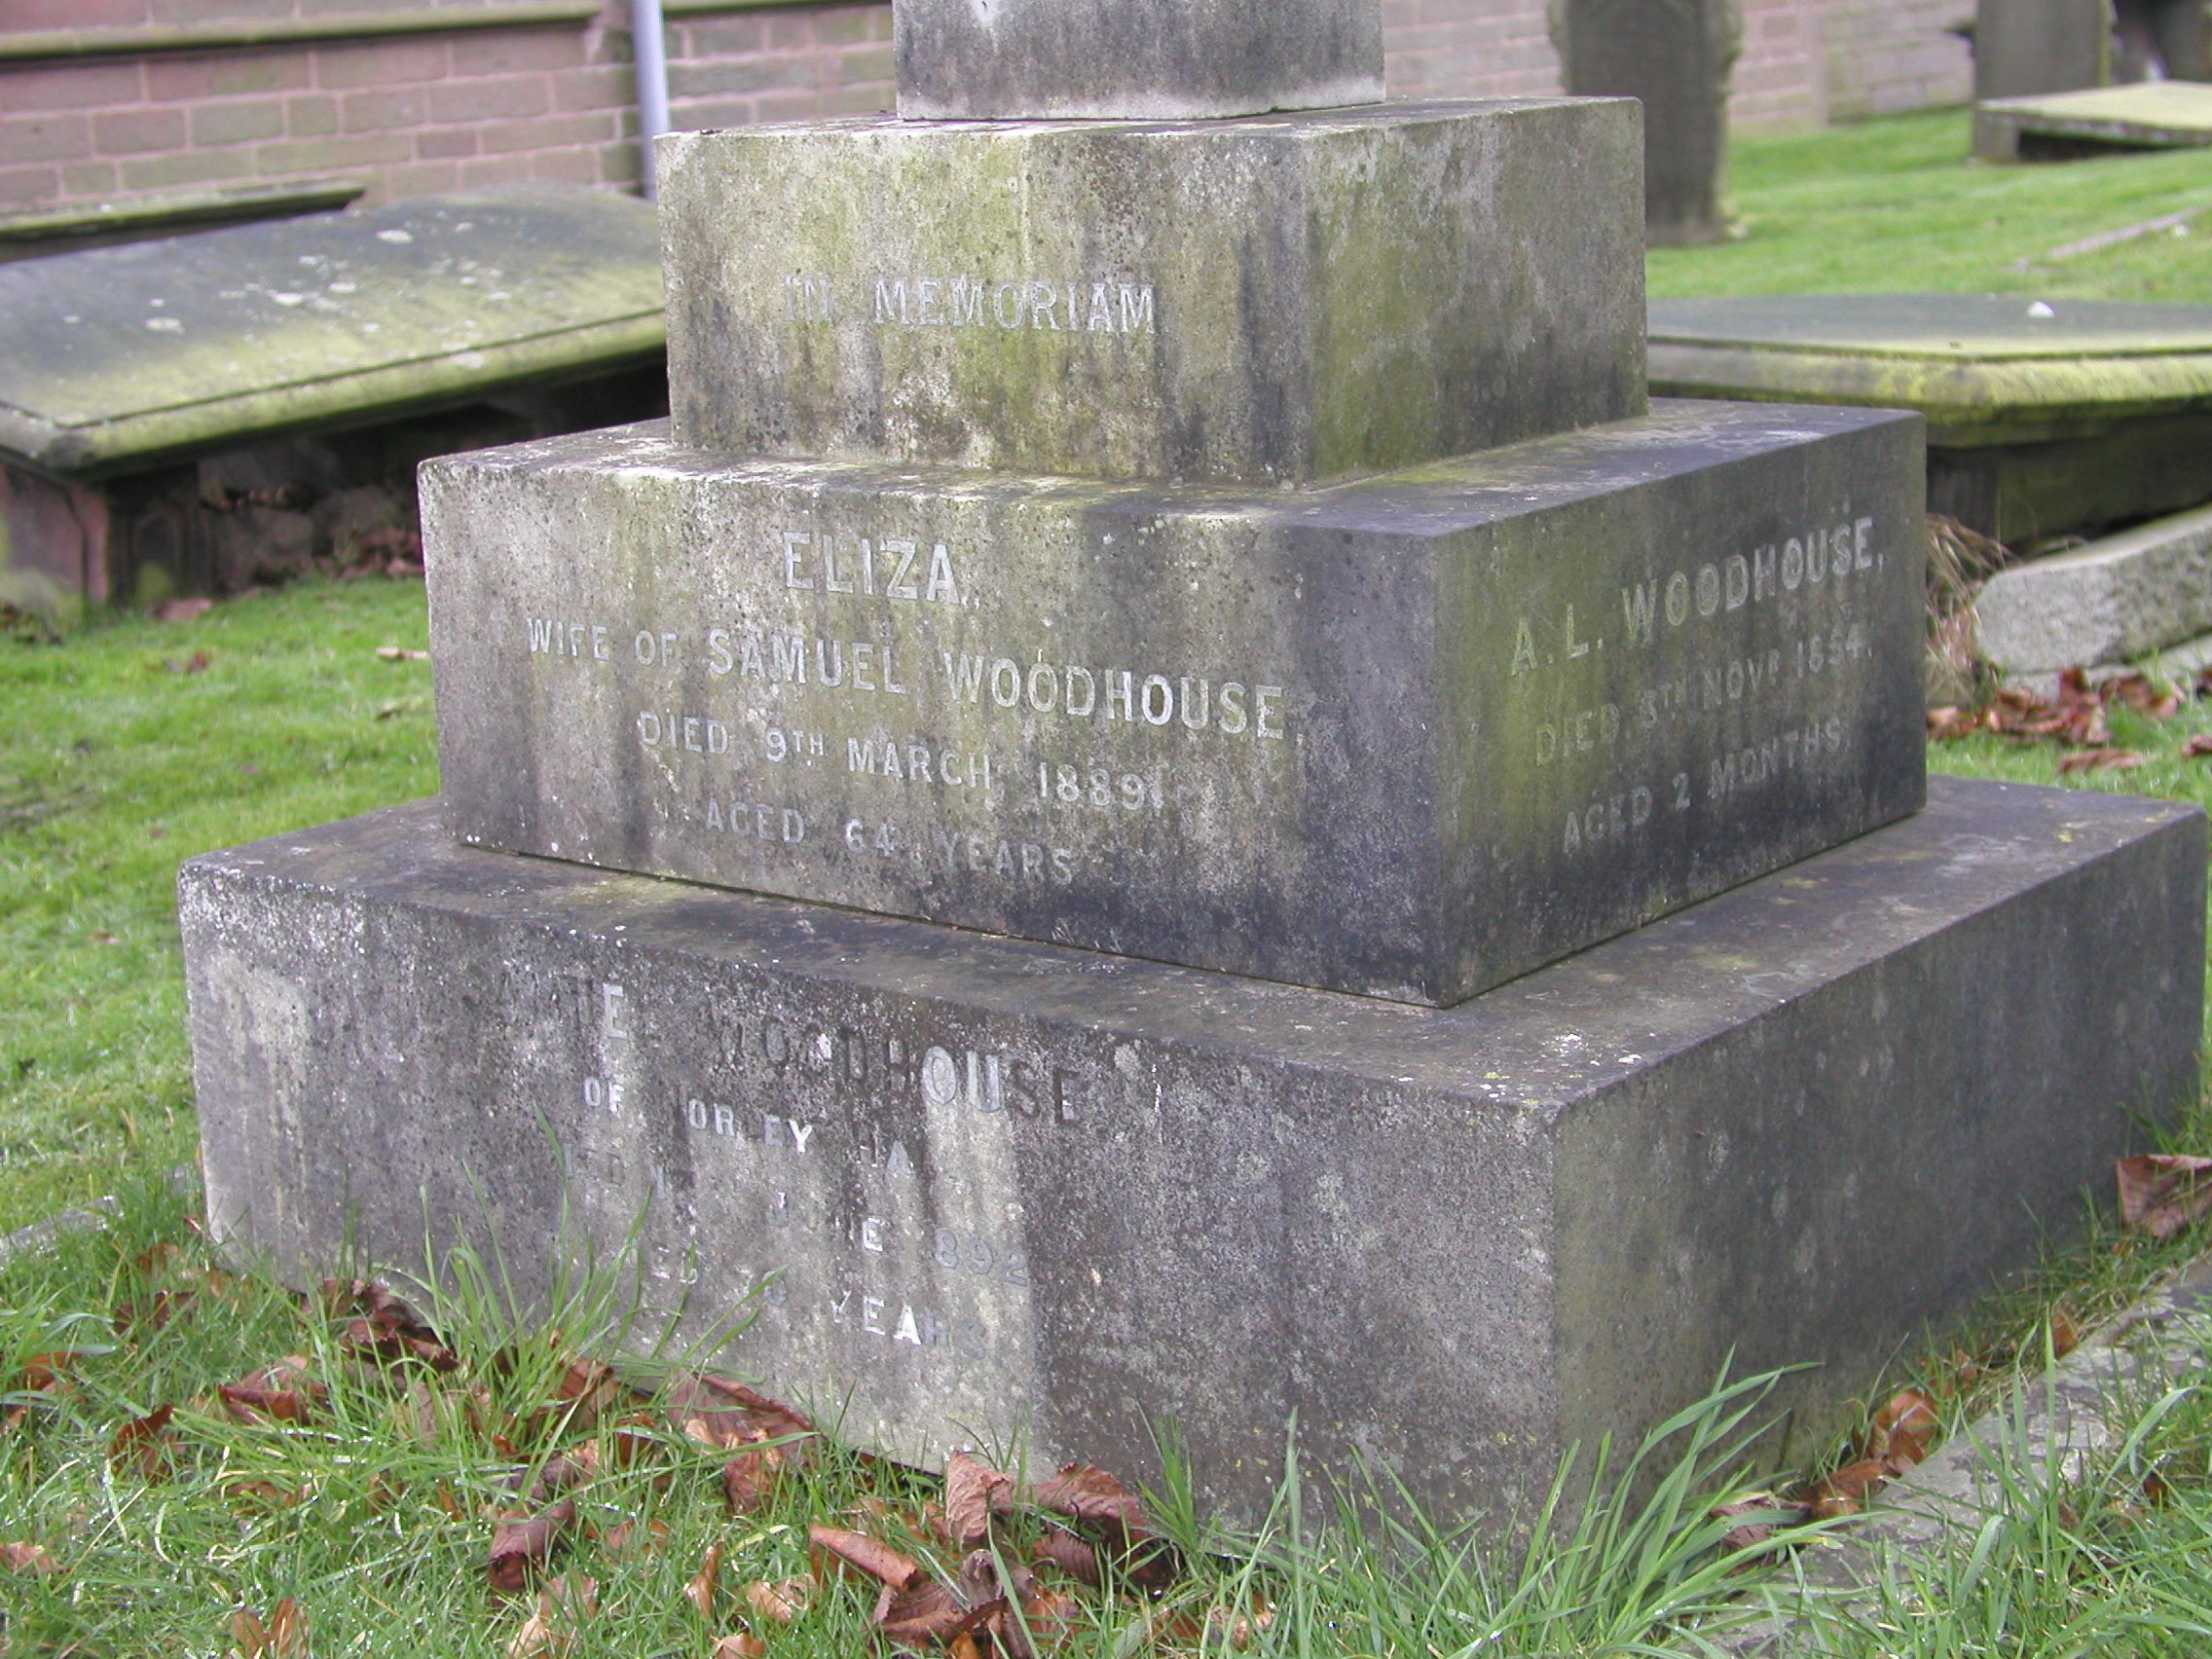 JPEG image - Grave of Samuel and Eliza Woodhouse, also of A.L.Woodhouse who died aged 2 months